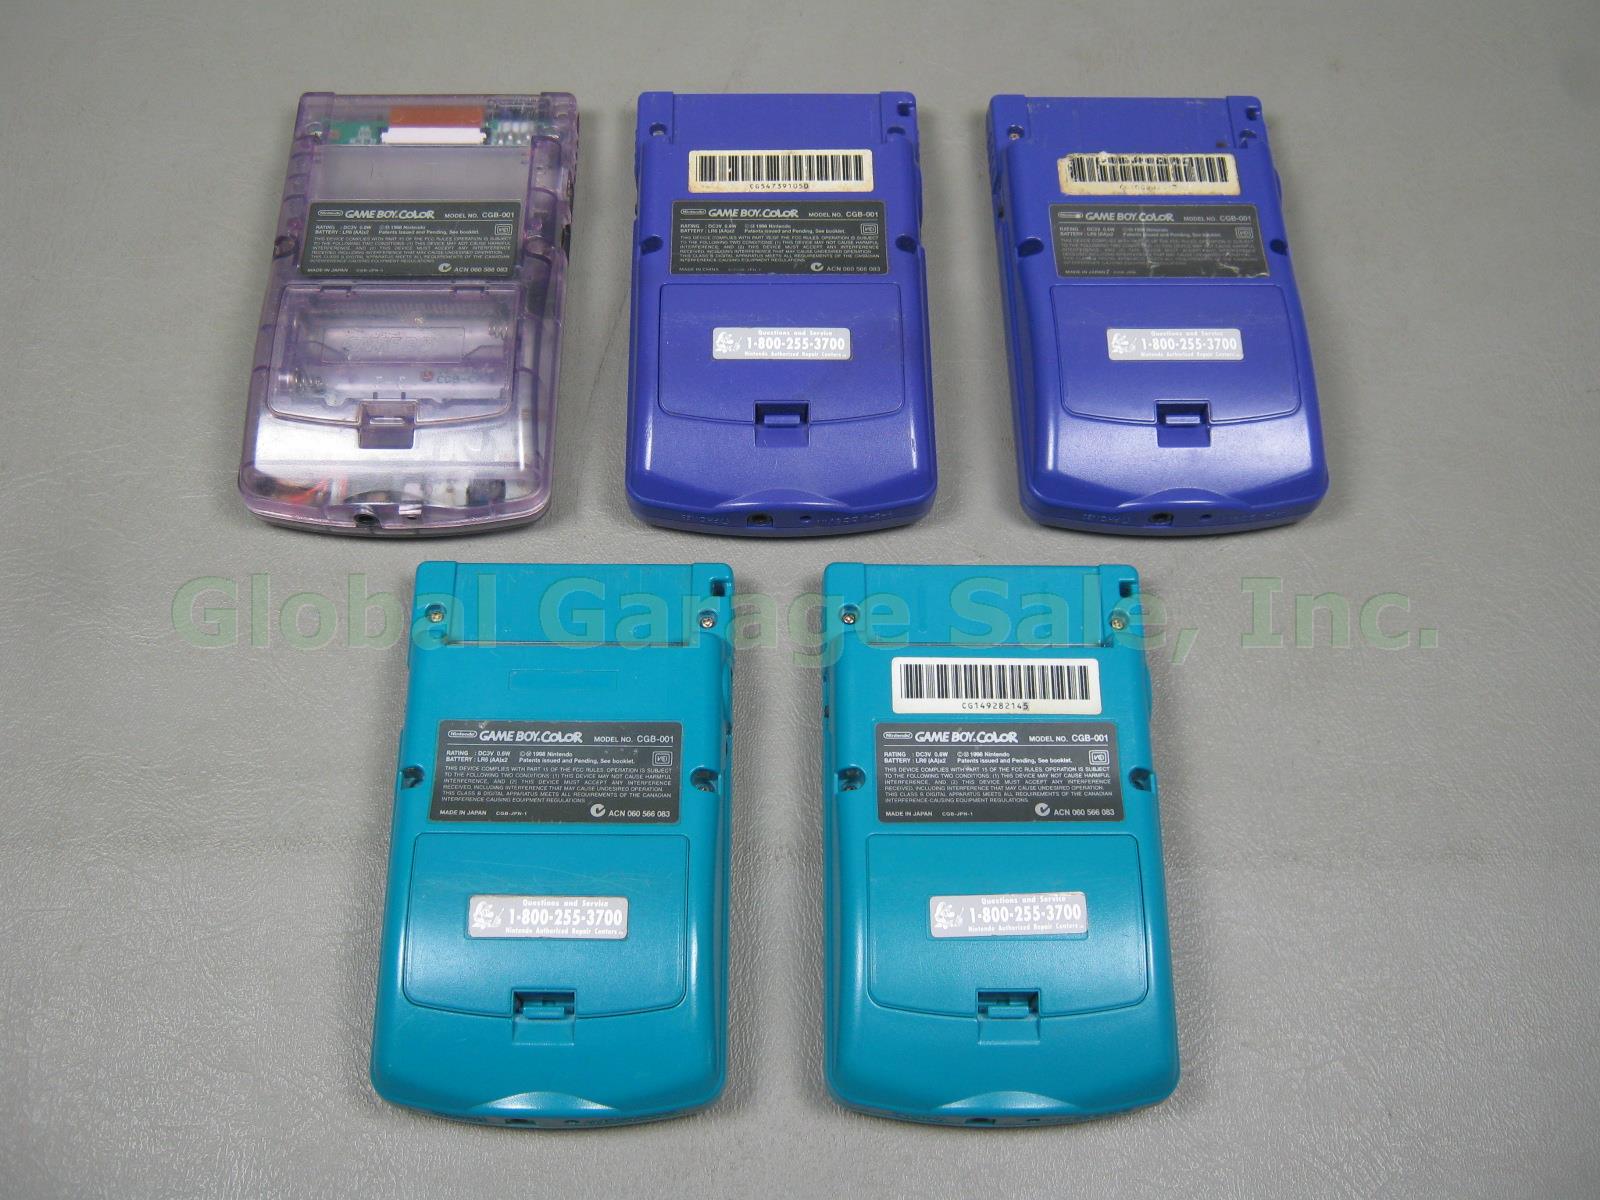 5 Tested Nintendo Gameboy Color GBC CGB-001 Console Lot Atomic Purple Grape Teal 6